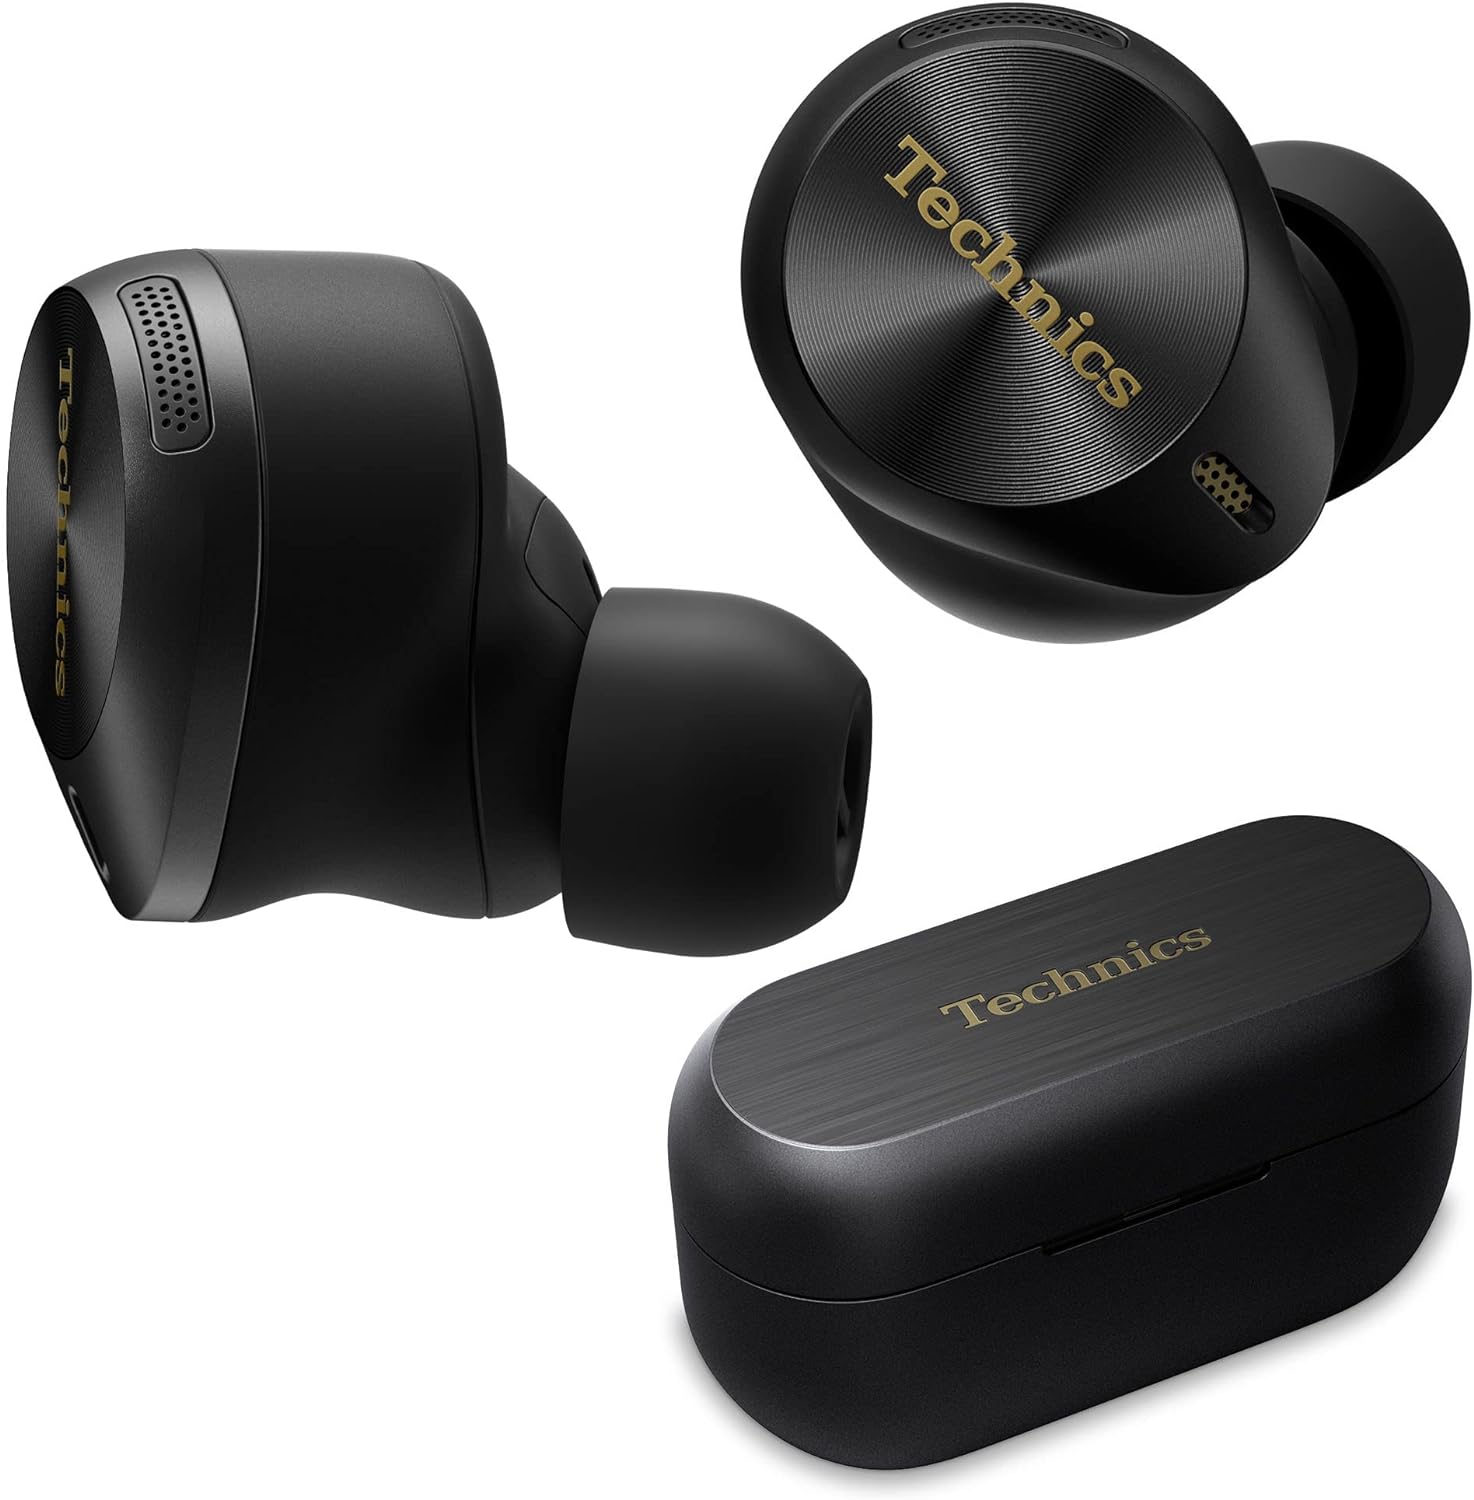 Technics Wireless Bluetooth Earbuds Review: Experience Epic Audio